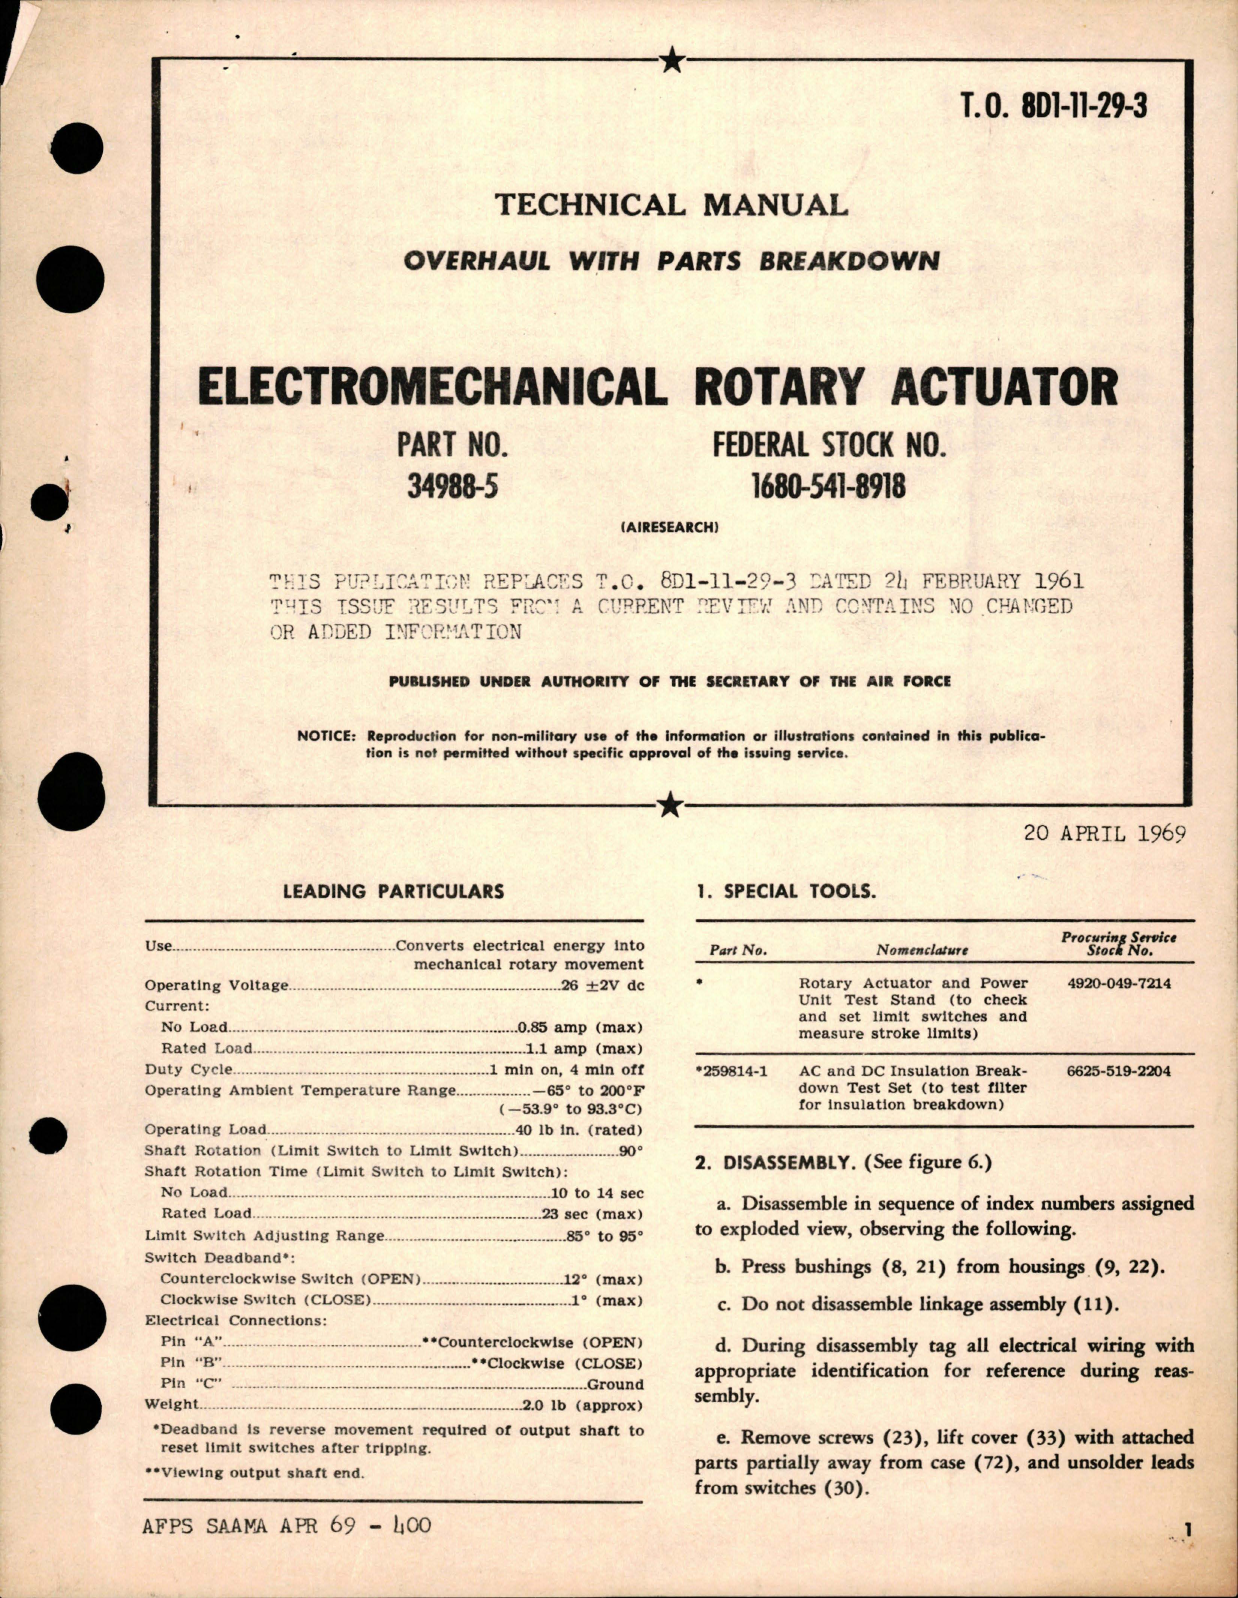 Sample page 1 from AirCorps Library document: Overhaul with Parts Breakdown for Electromechanical Rotary Actuator - Part 34988-5